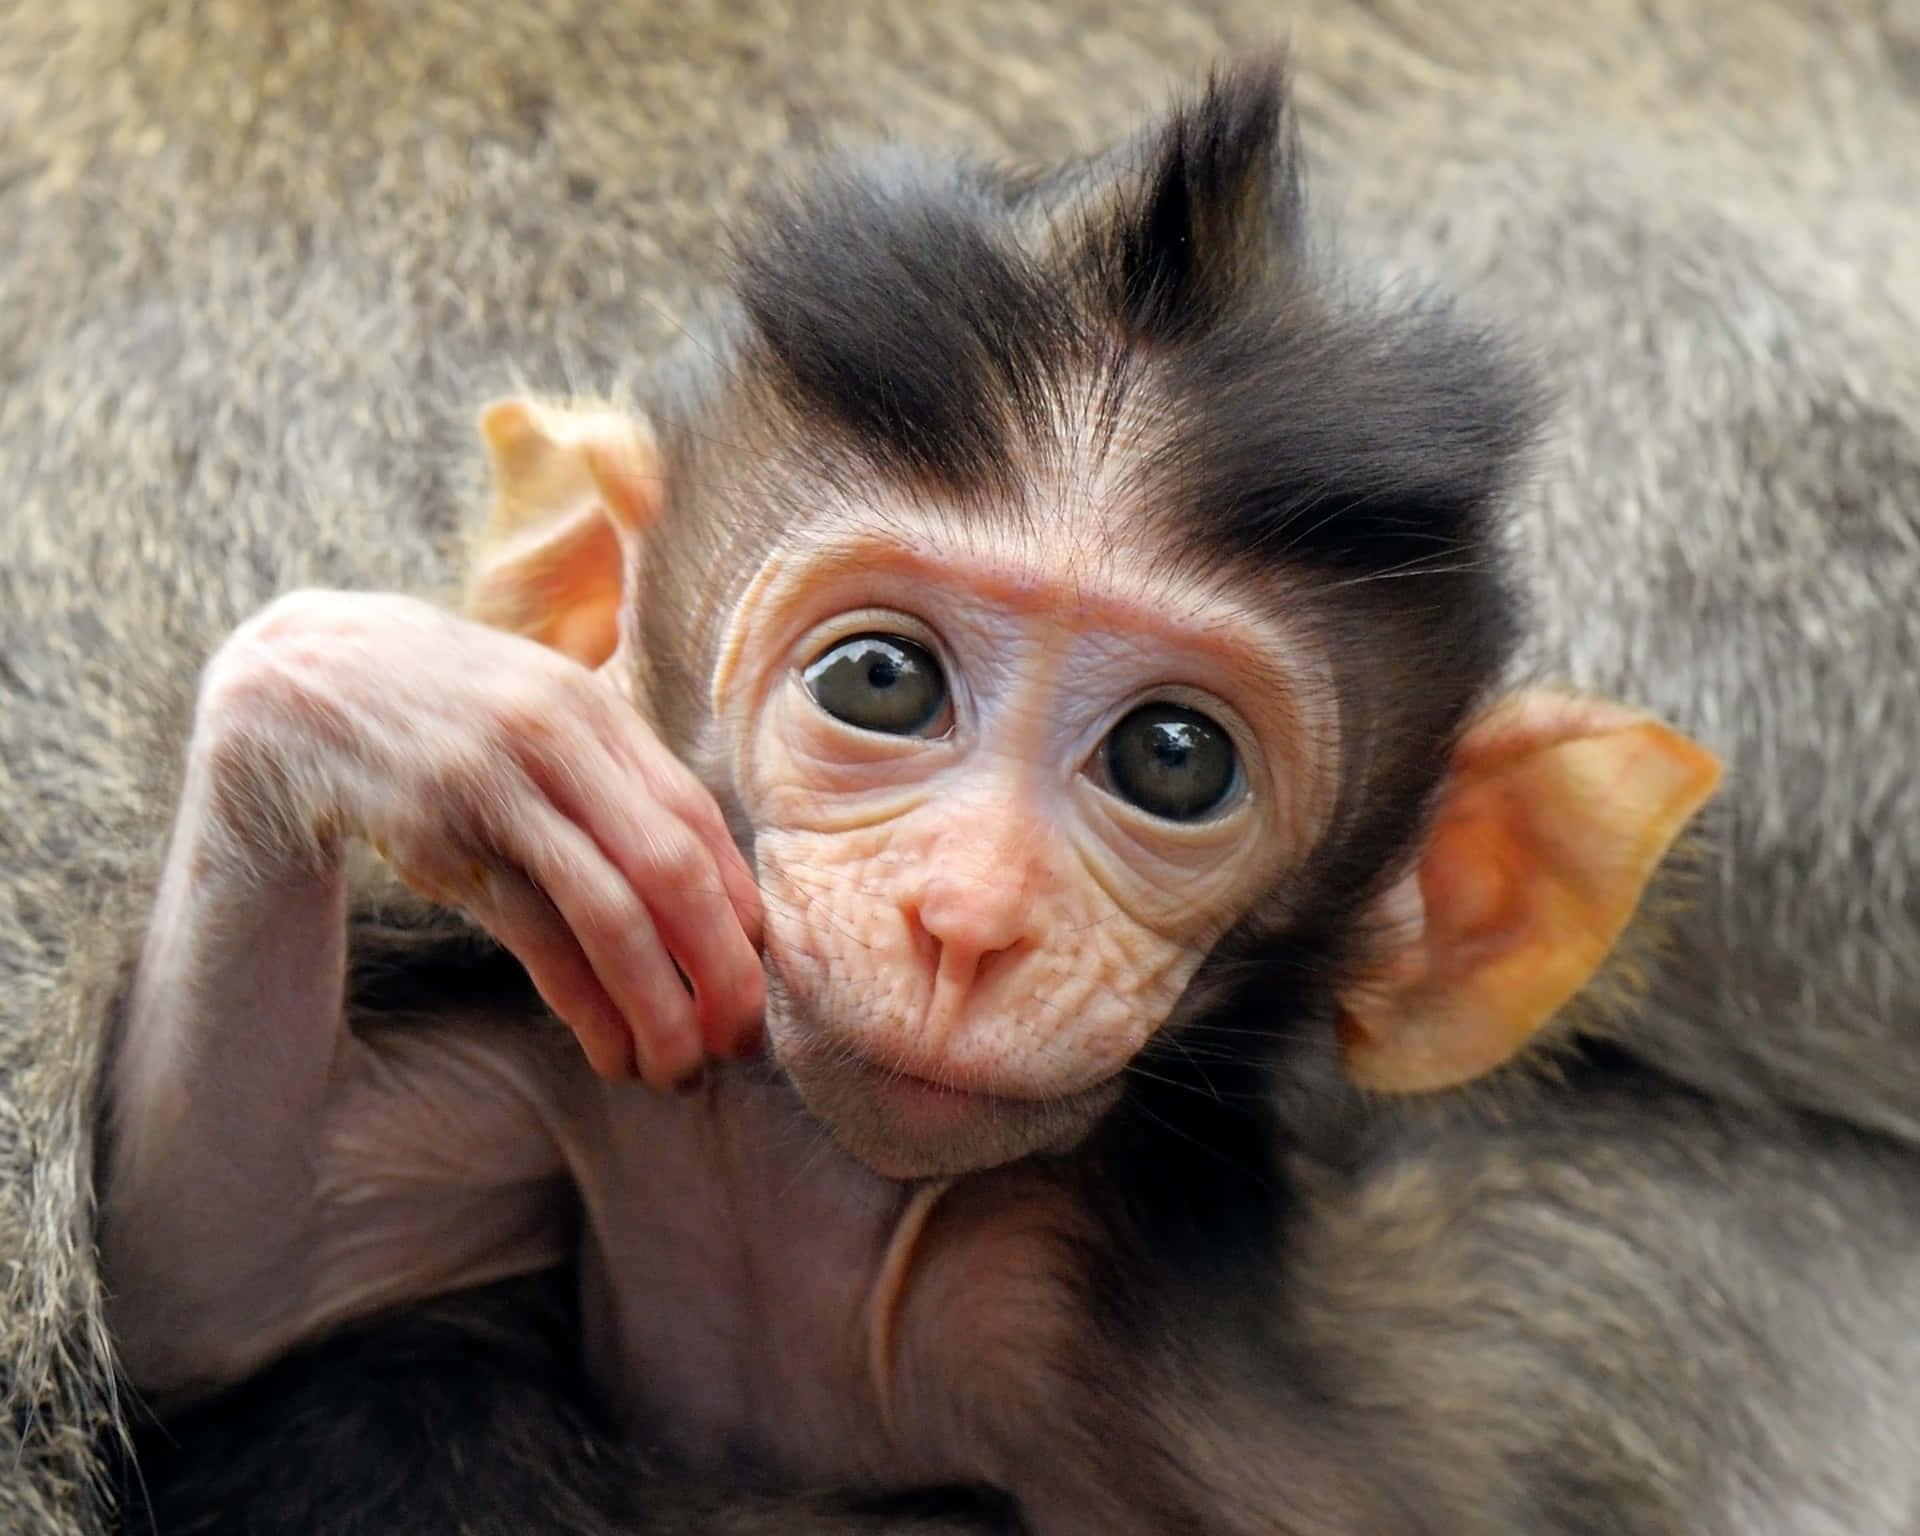 Cuddle Time: Adorable baby monkey resting